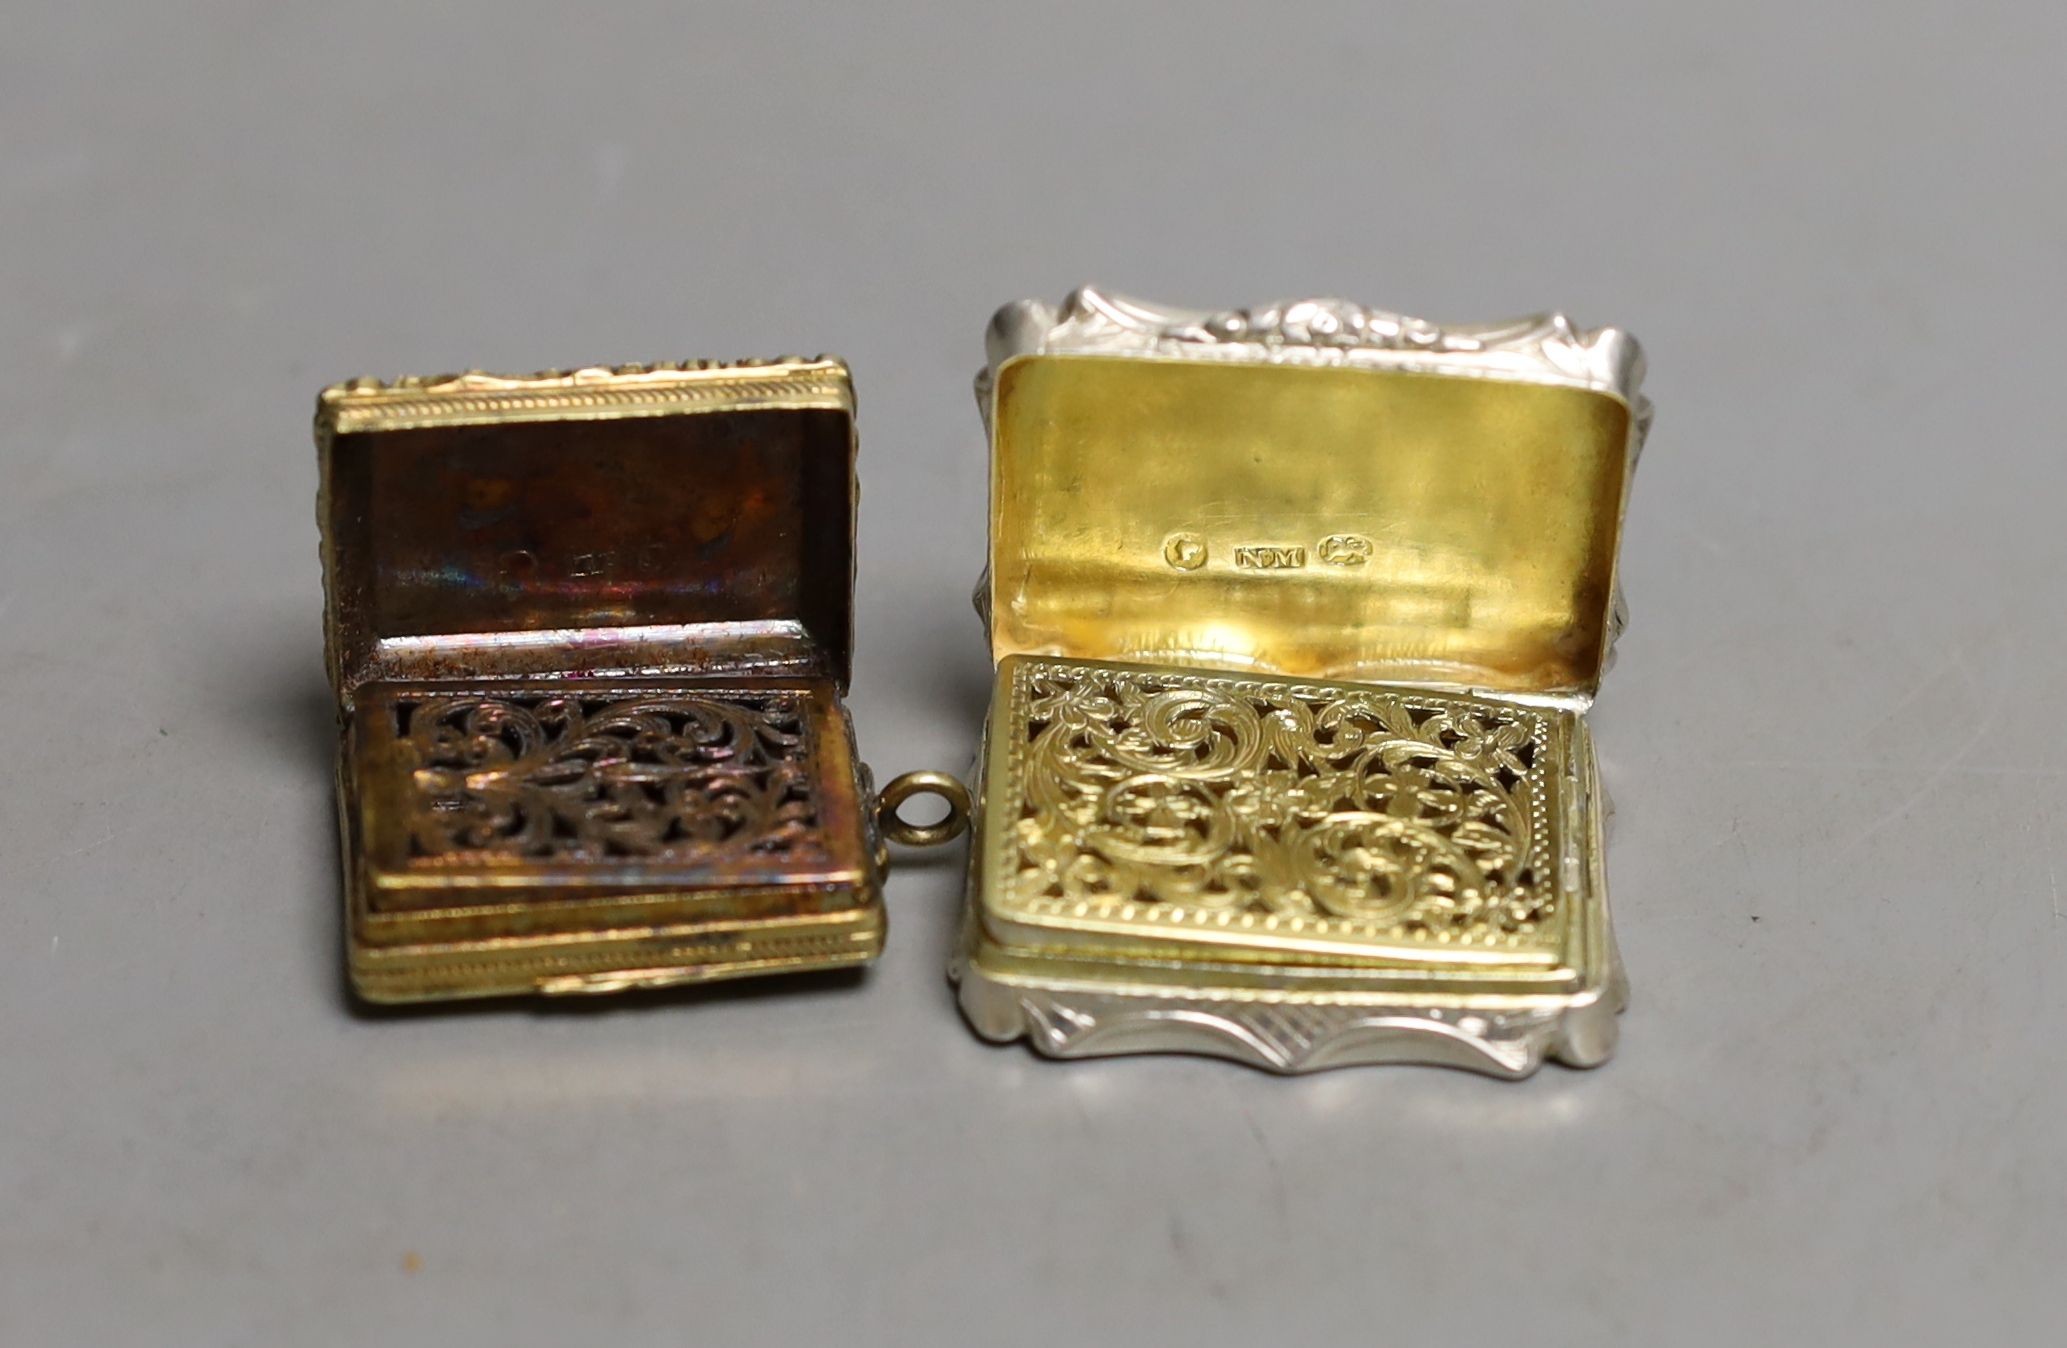 A George IV engine turned silver gilt vinaigrette, by Thomas Parker, Birmingham, with later bale,(date letter illegible), 30mm and a later vinaigrette by Nathaniel Mills, Birmingham, 1846, 36mm.